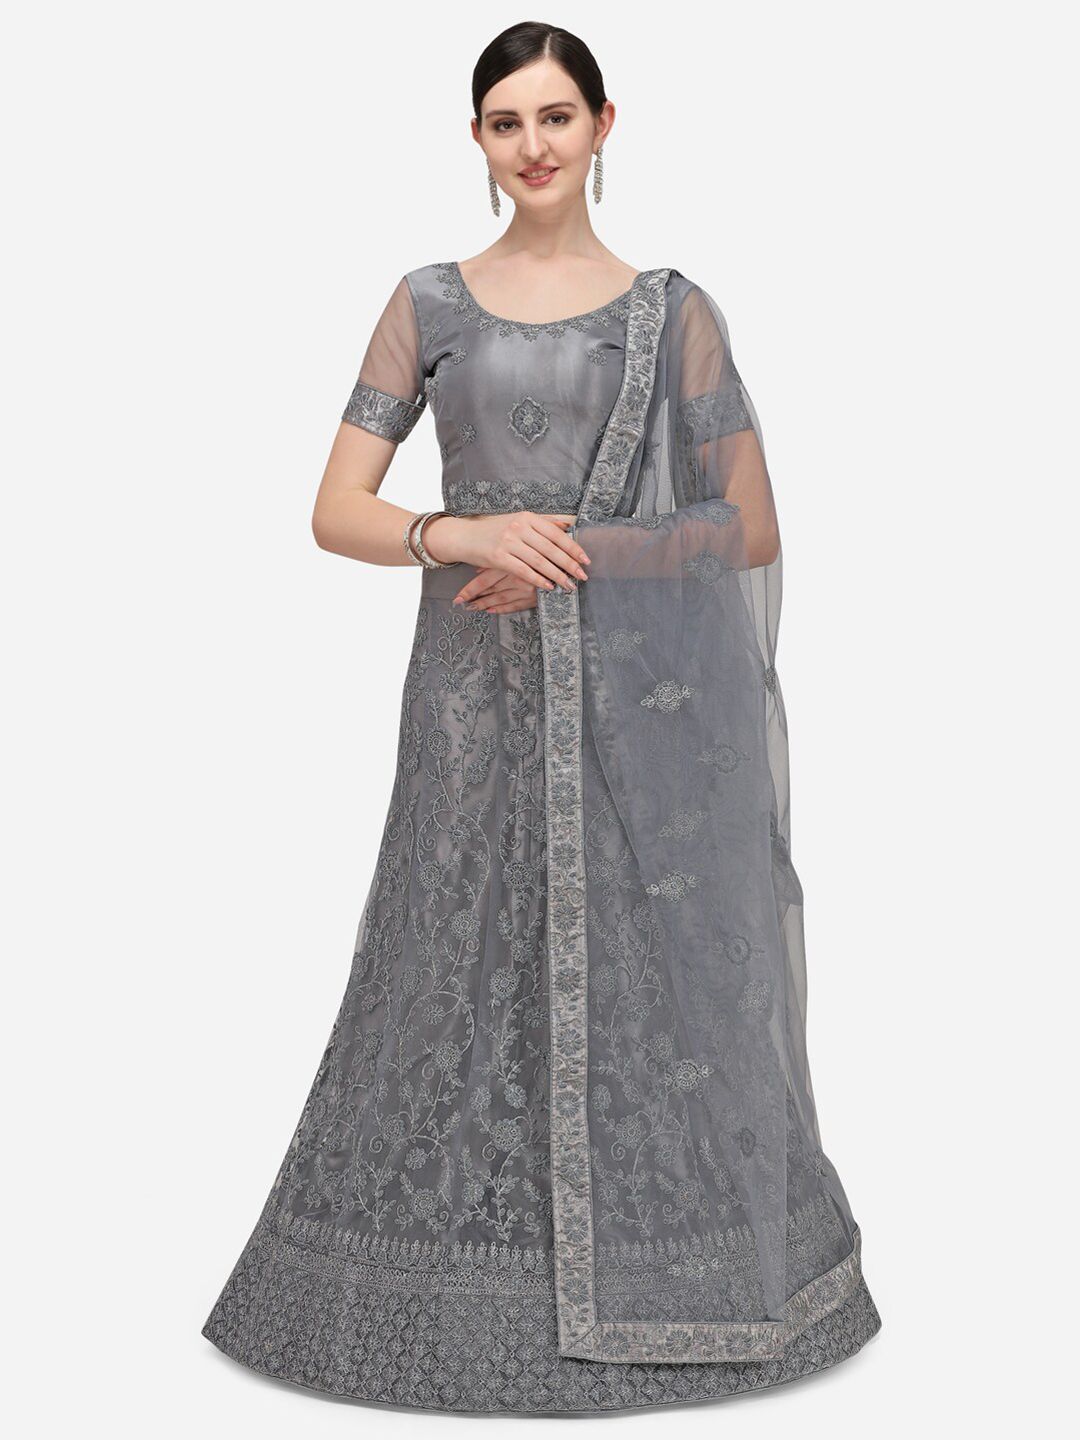 Netram Grey Embroidered Semi-Stitched Net Lehenga & Unstitched Blouse With Dupatta Price in India